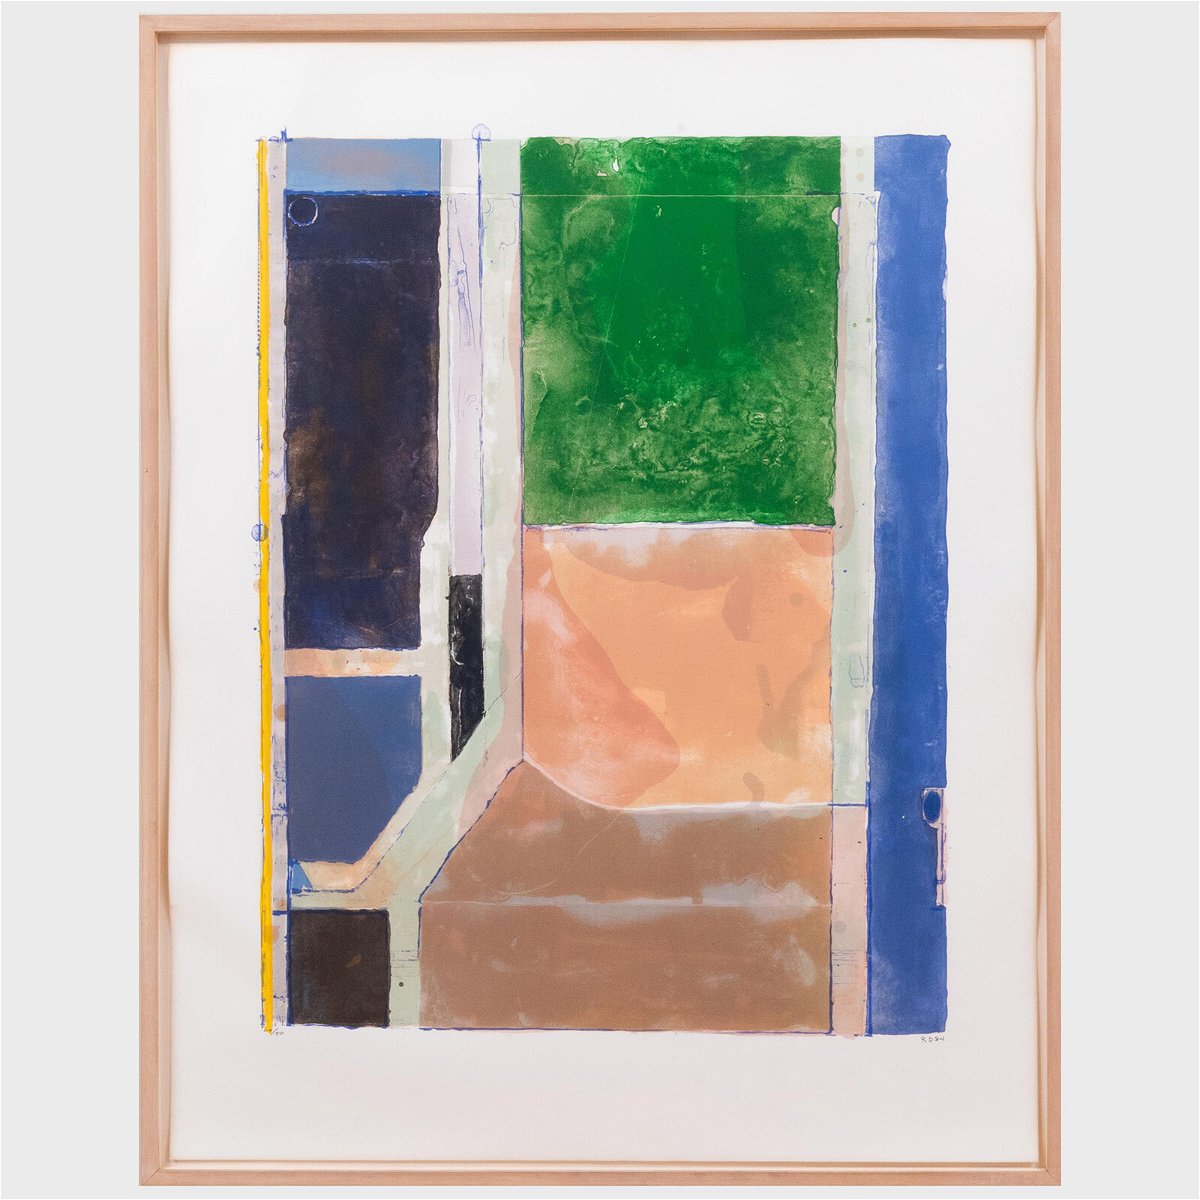 <i>Stair Galleries</i><br/>Many of the artworks Didion owned were personal gifts to her from the artists.